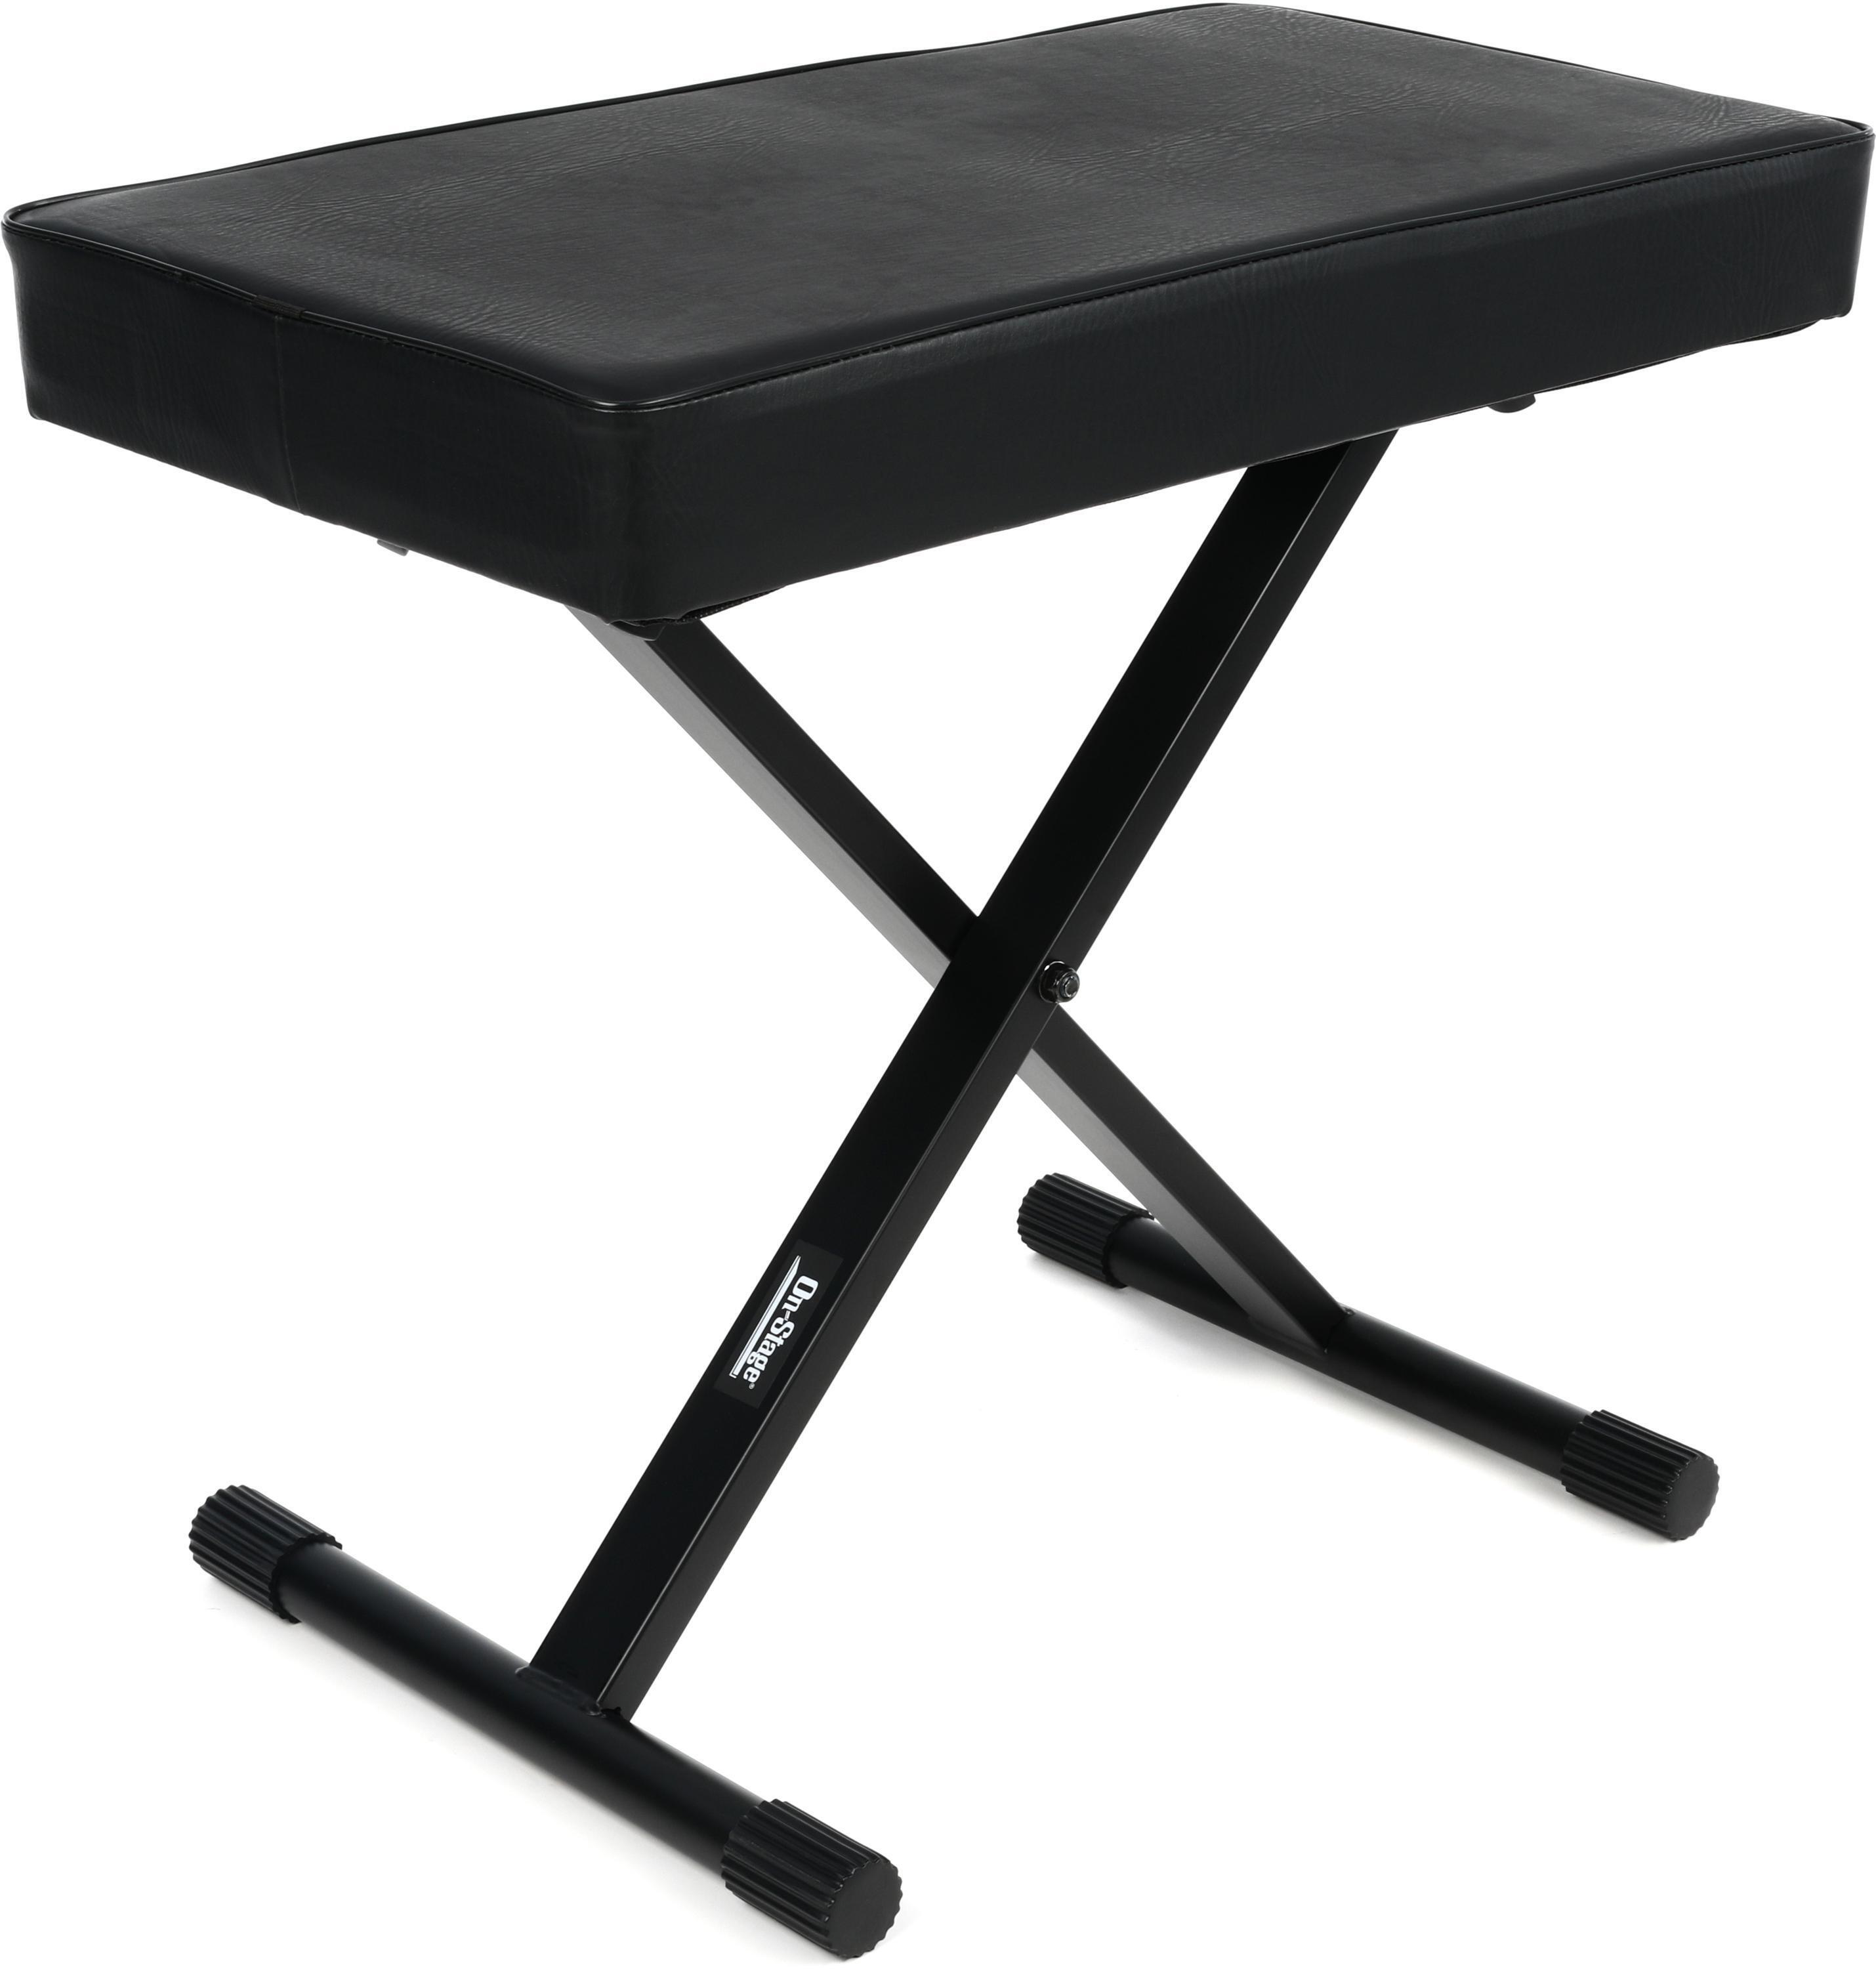 Bundled Item: On-Stage KT7800+ Deluxe X-Style Bench